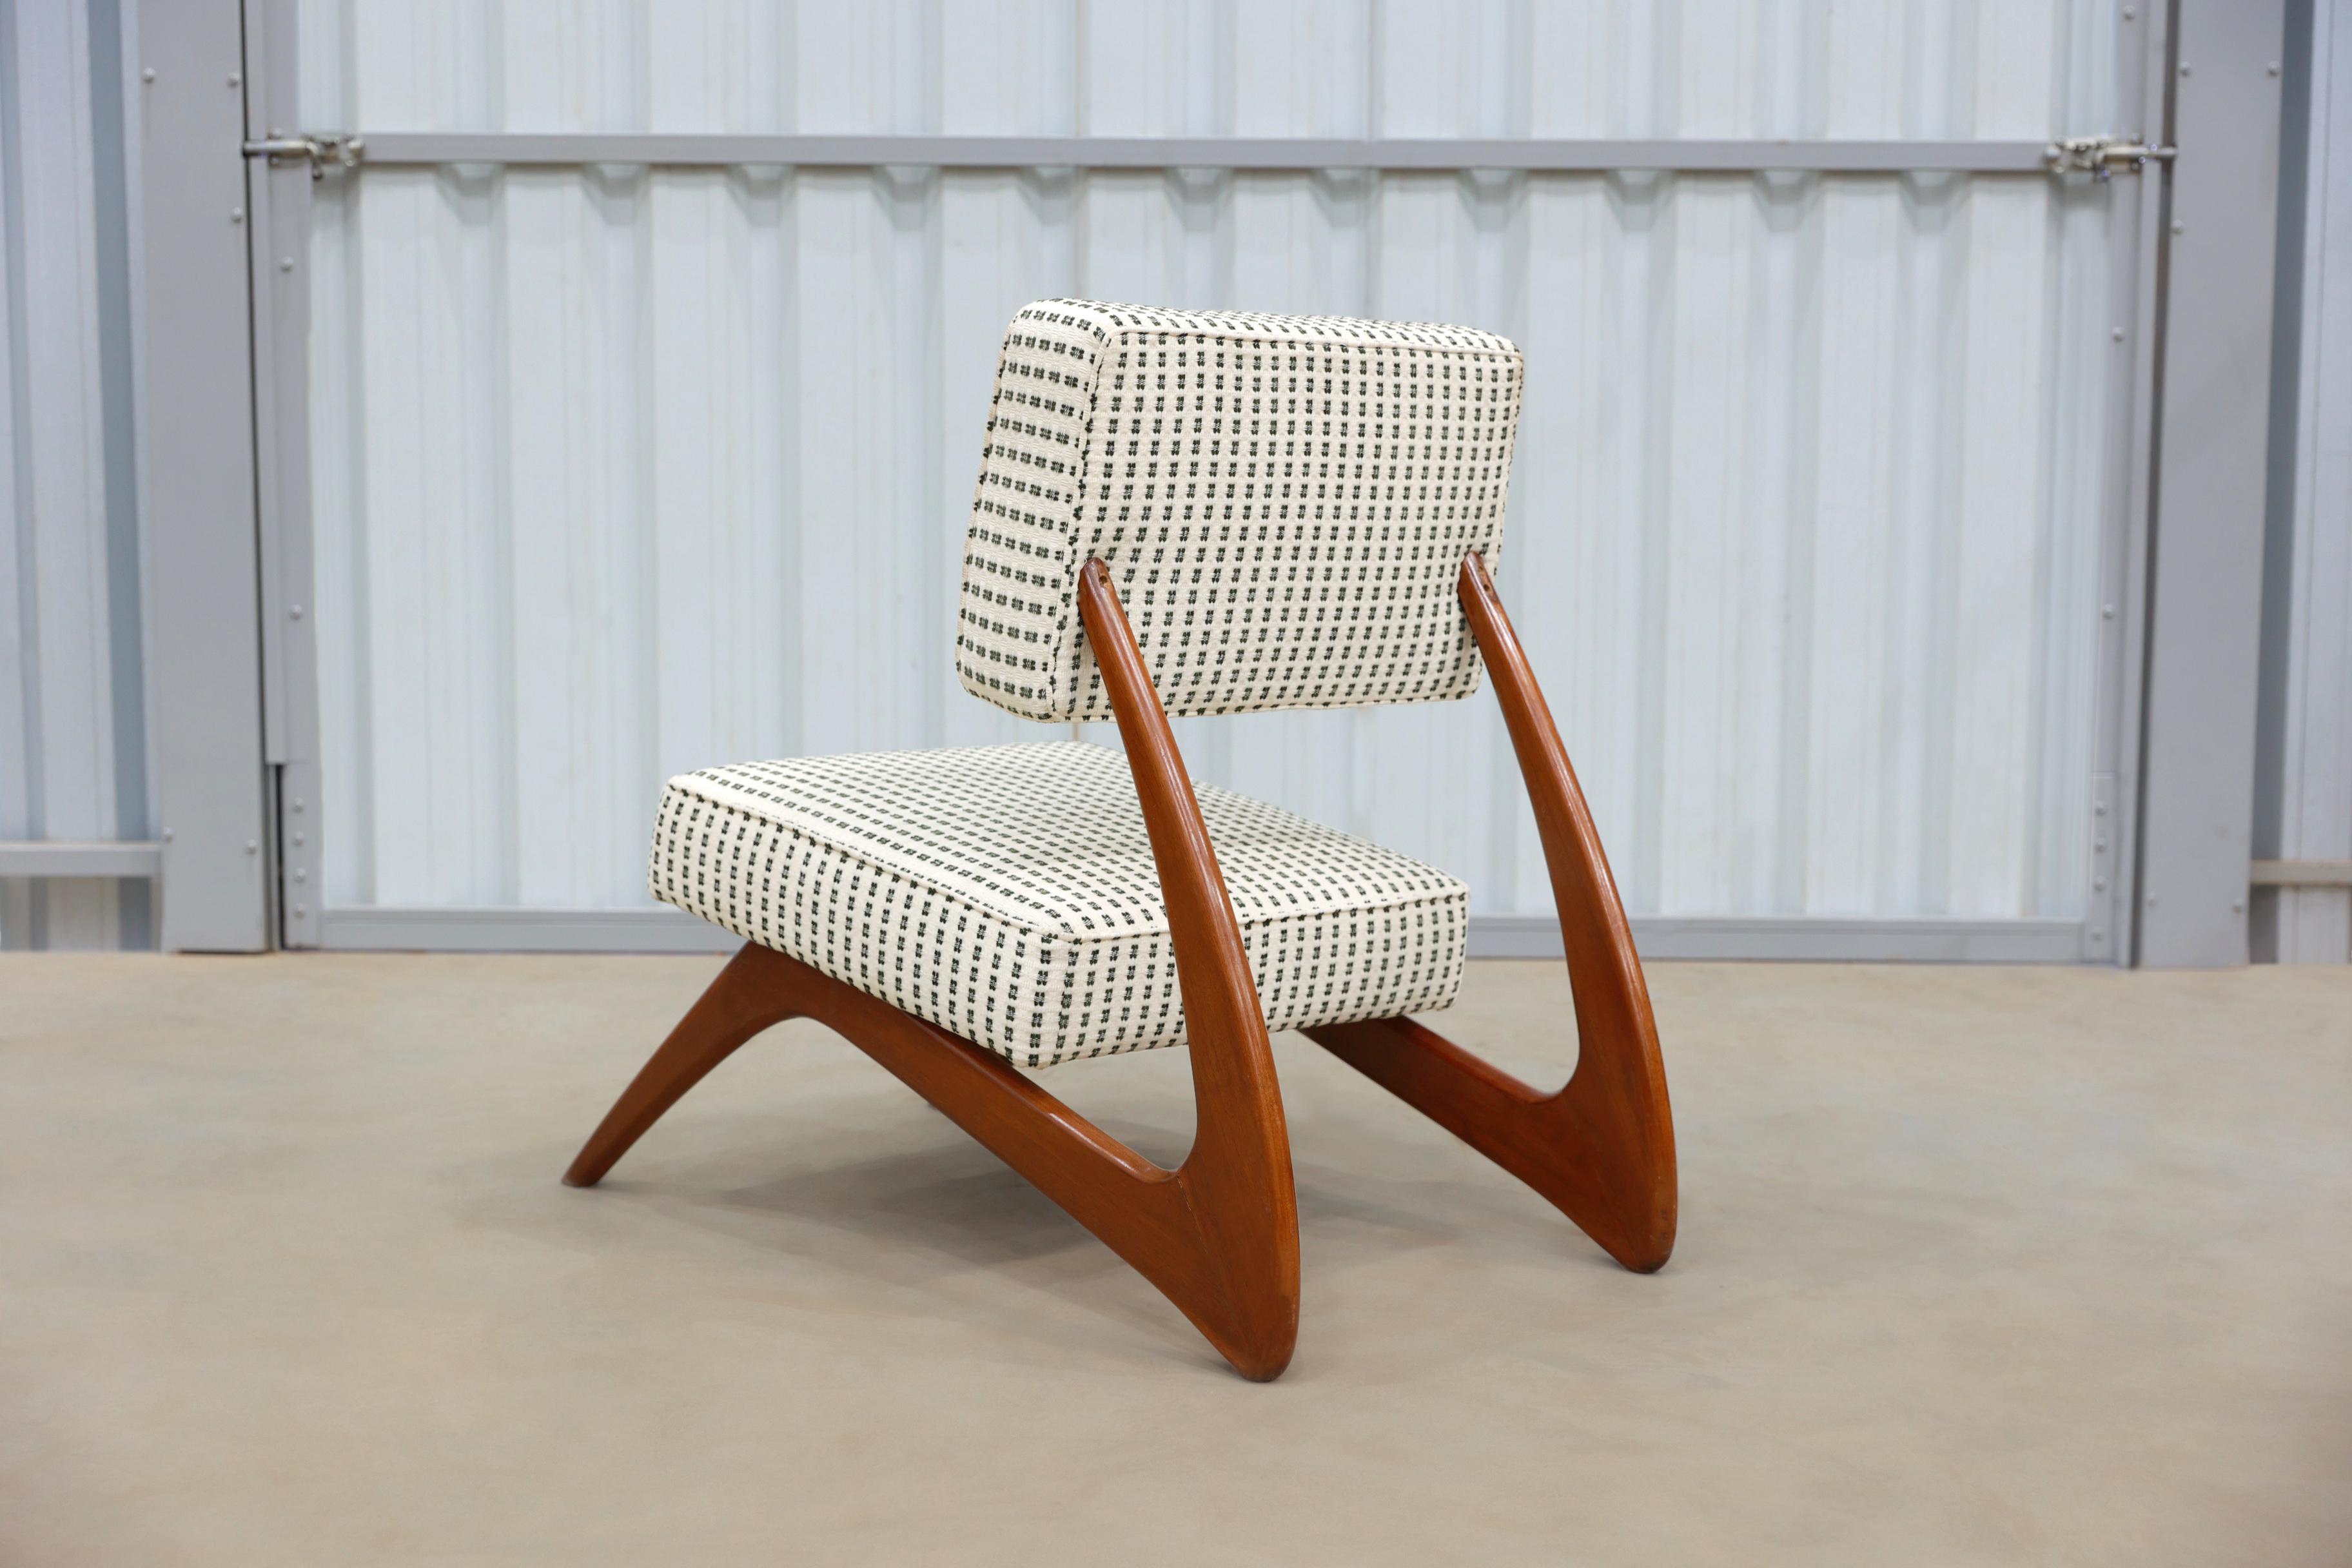 Brazilian Modern Lounge Chair in hardwood by Moveis Cimo, Brazil, 1950s In Good Condition For Sale In New York, NY